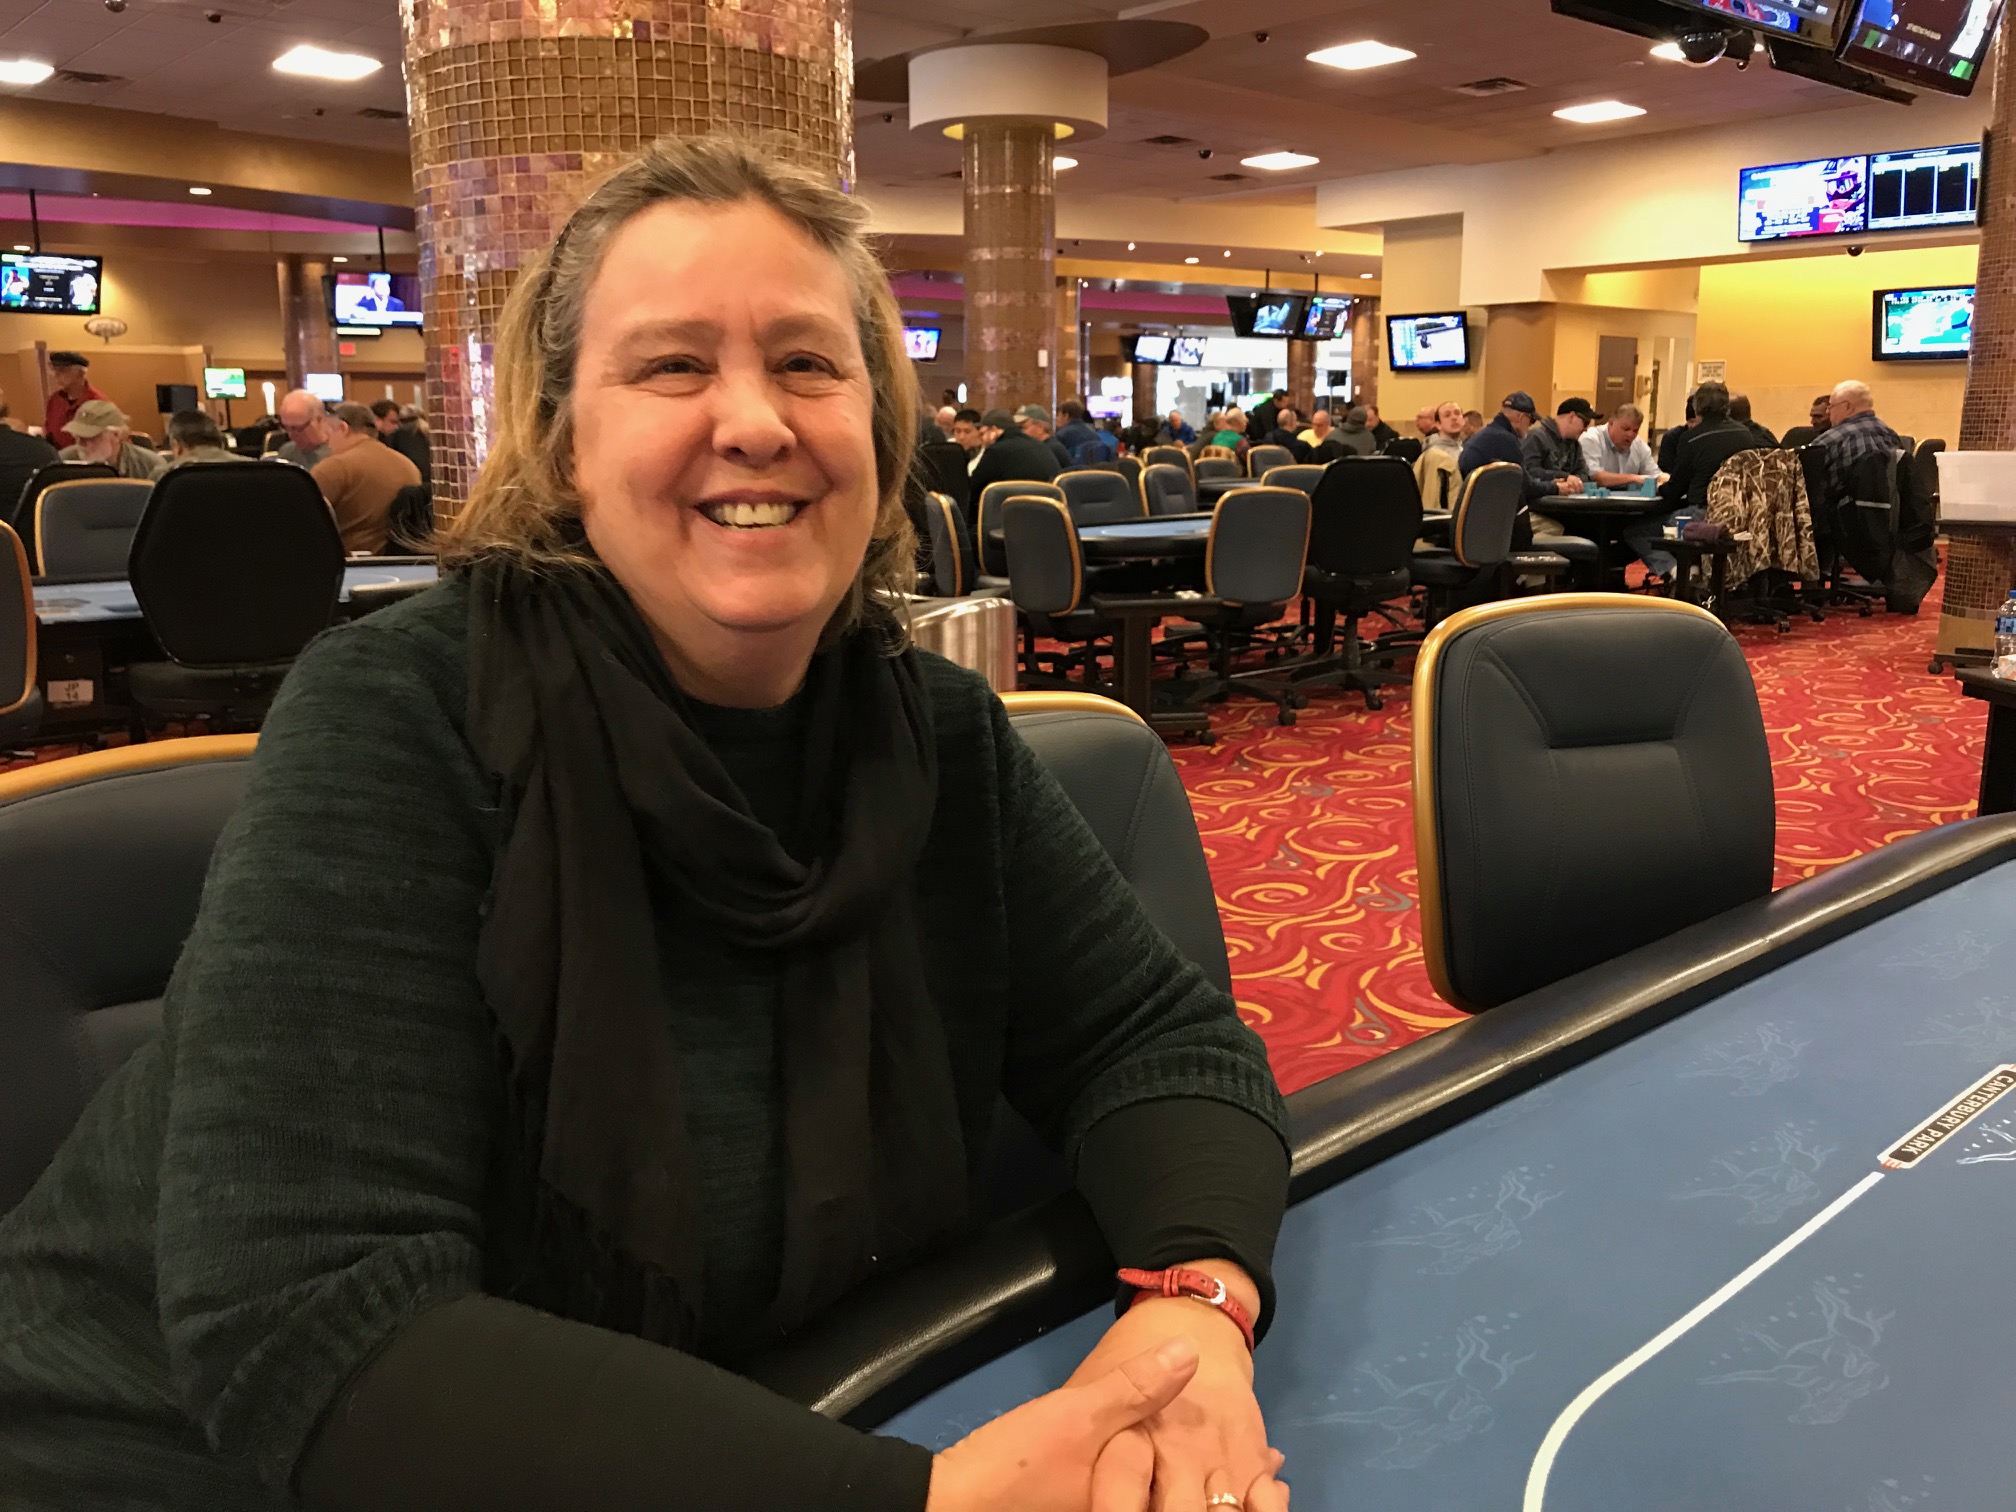 Denise Ambrosio is a regular poker player at Canterbury Park and plans to play in the Feb. 10 Galentine's Day tournament.